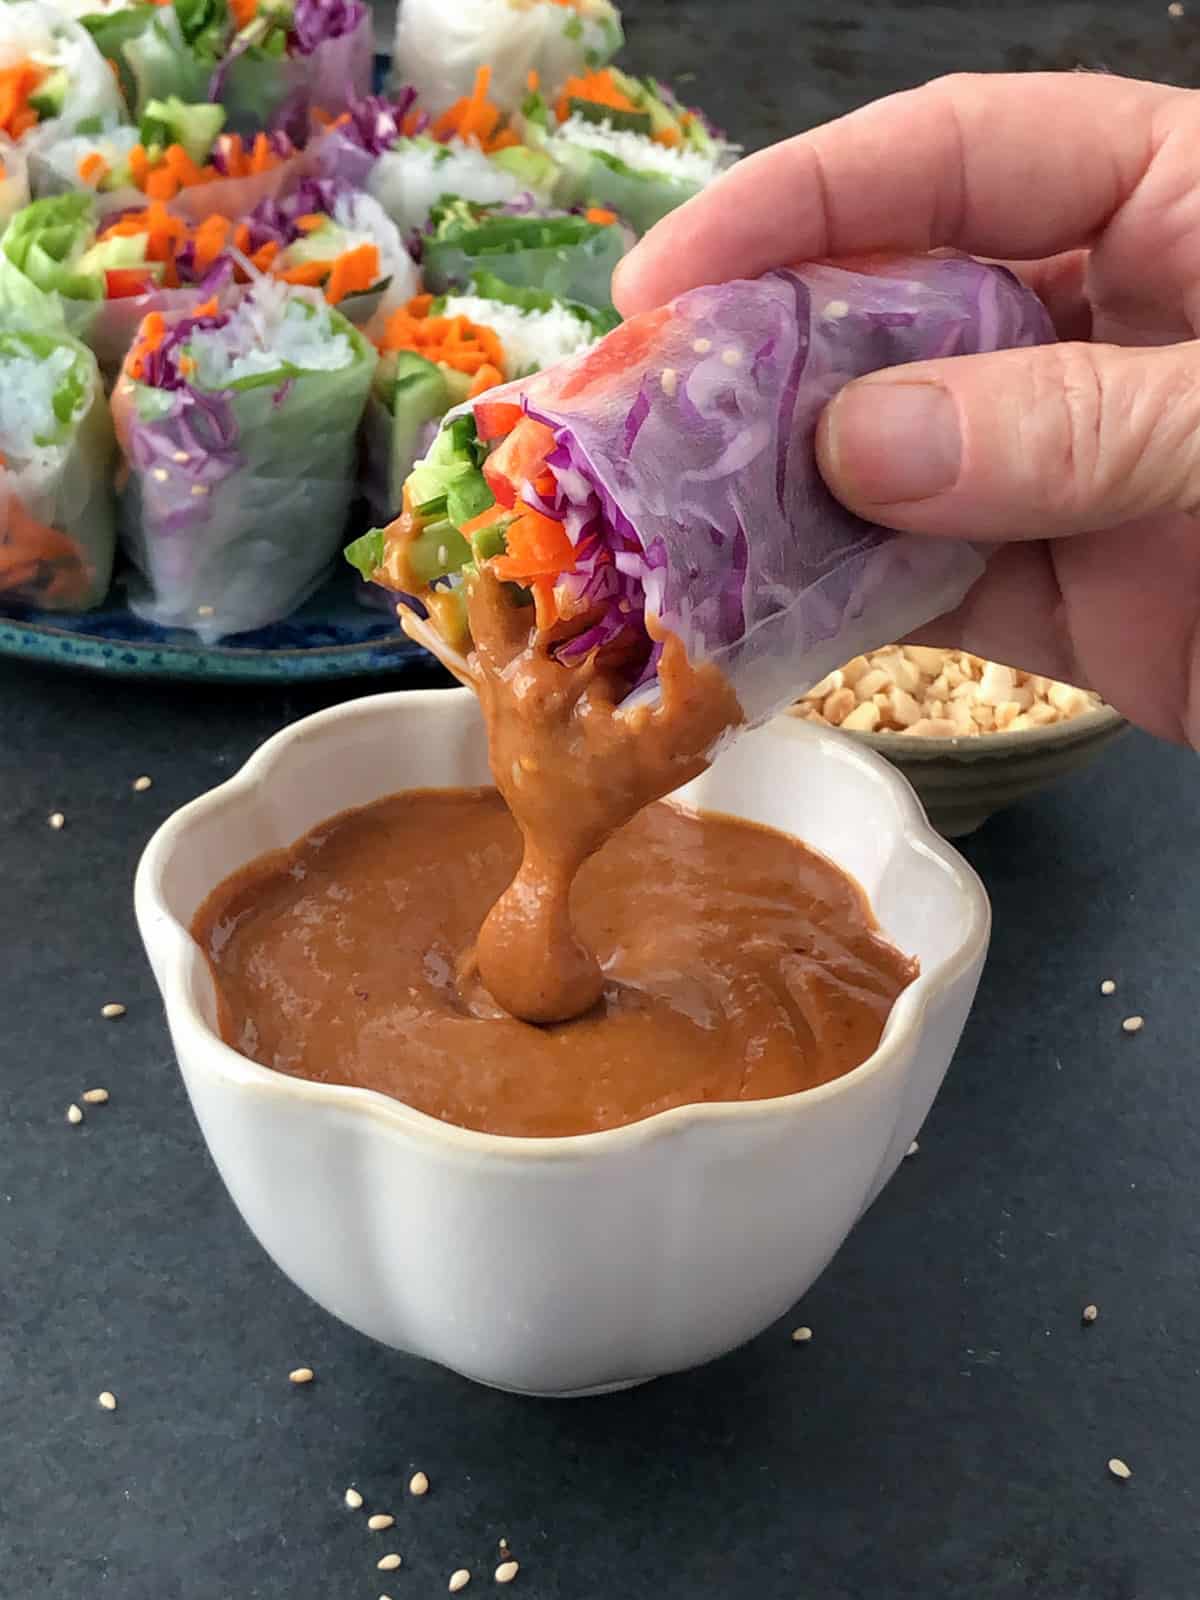 Vegetarian salad rolls dipped in spicy peanut dipping sauce.